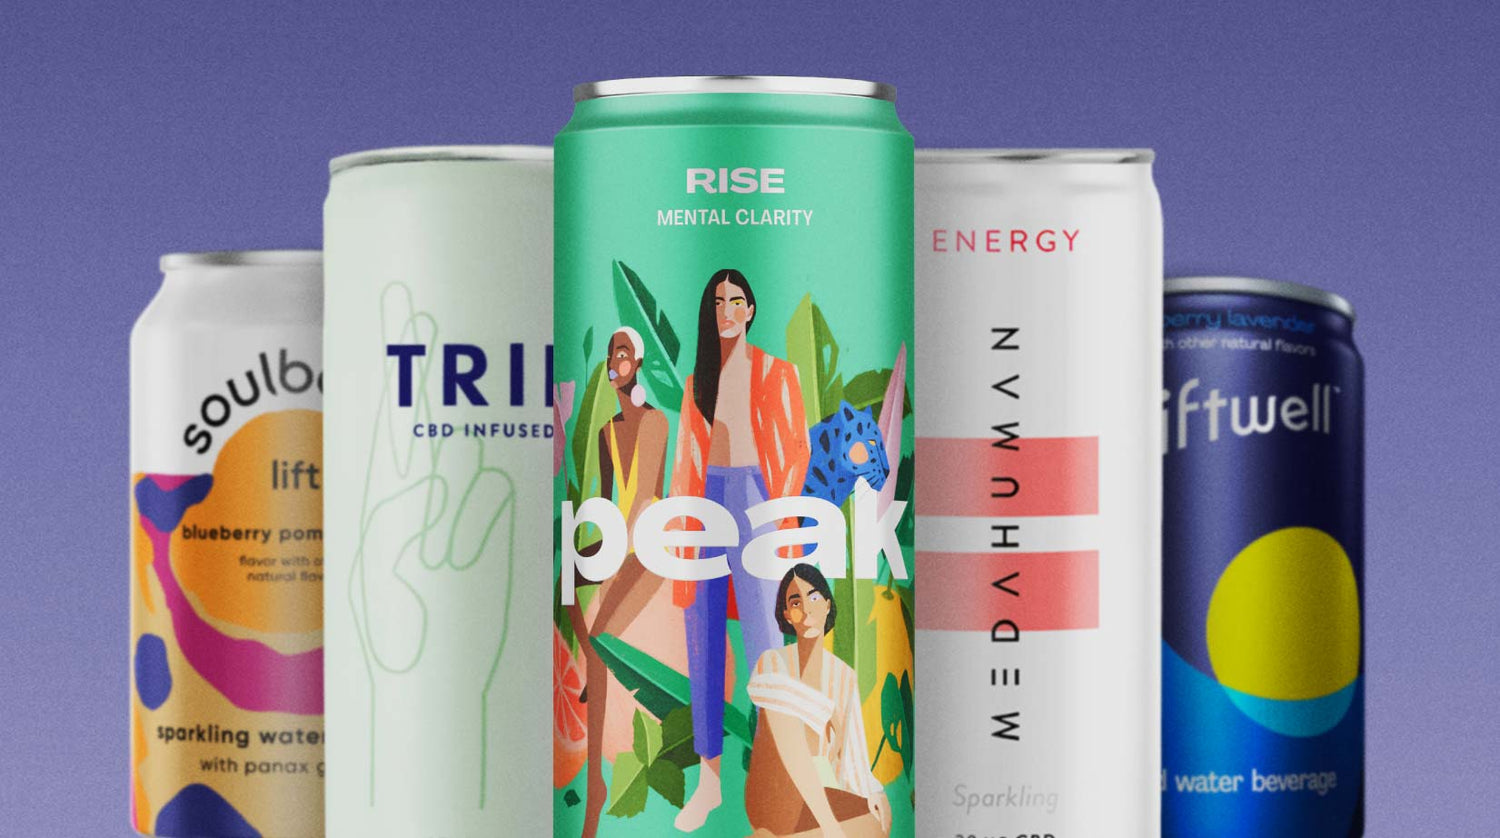 Function Over Form: Drinks that make you feel - Peak